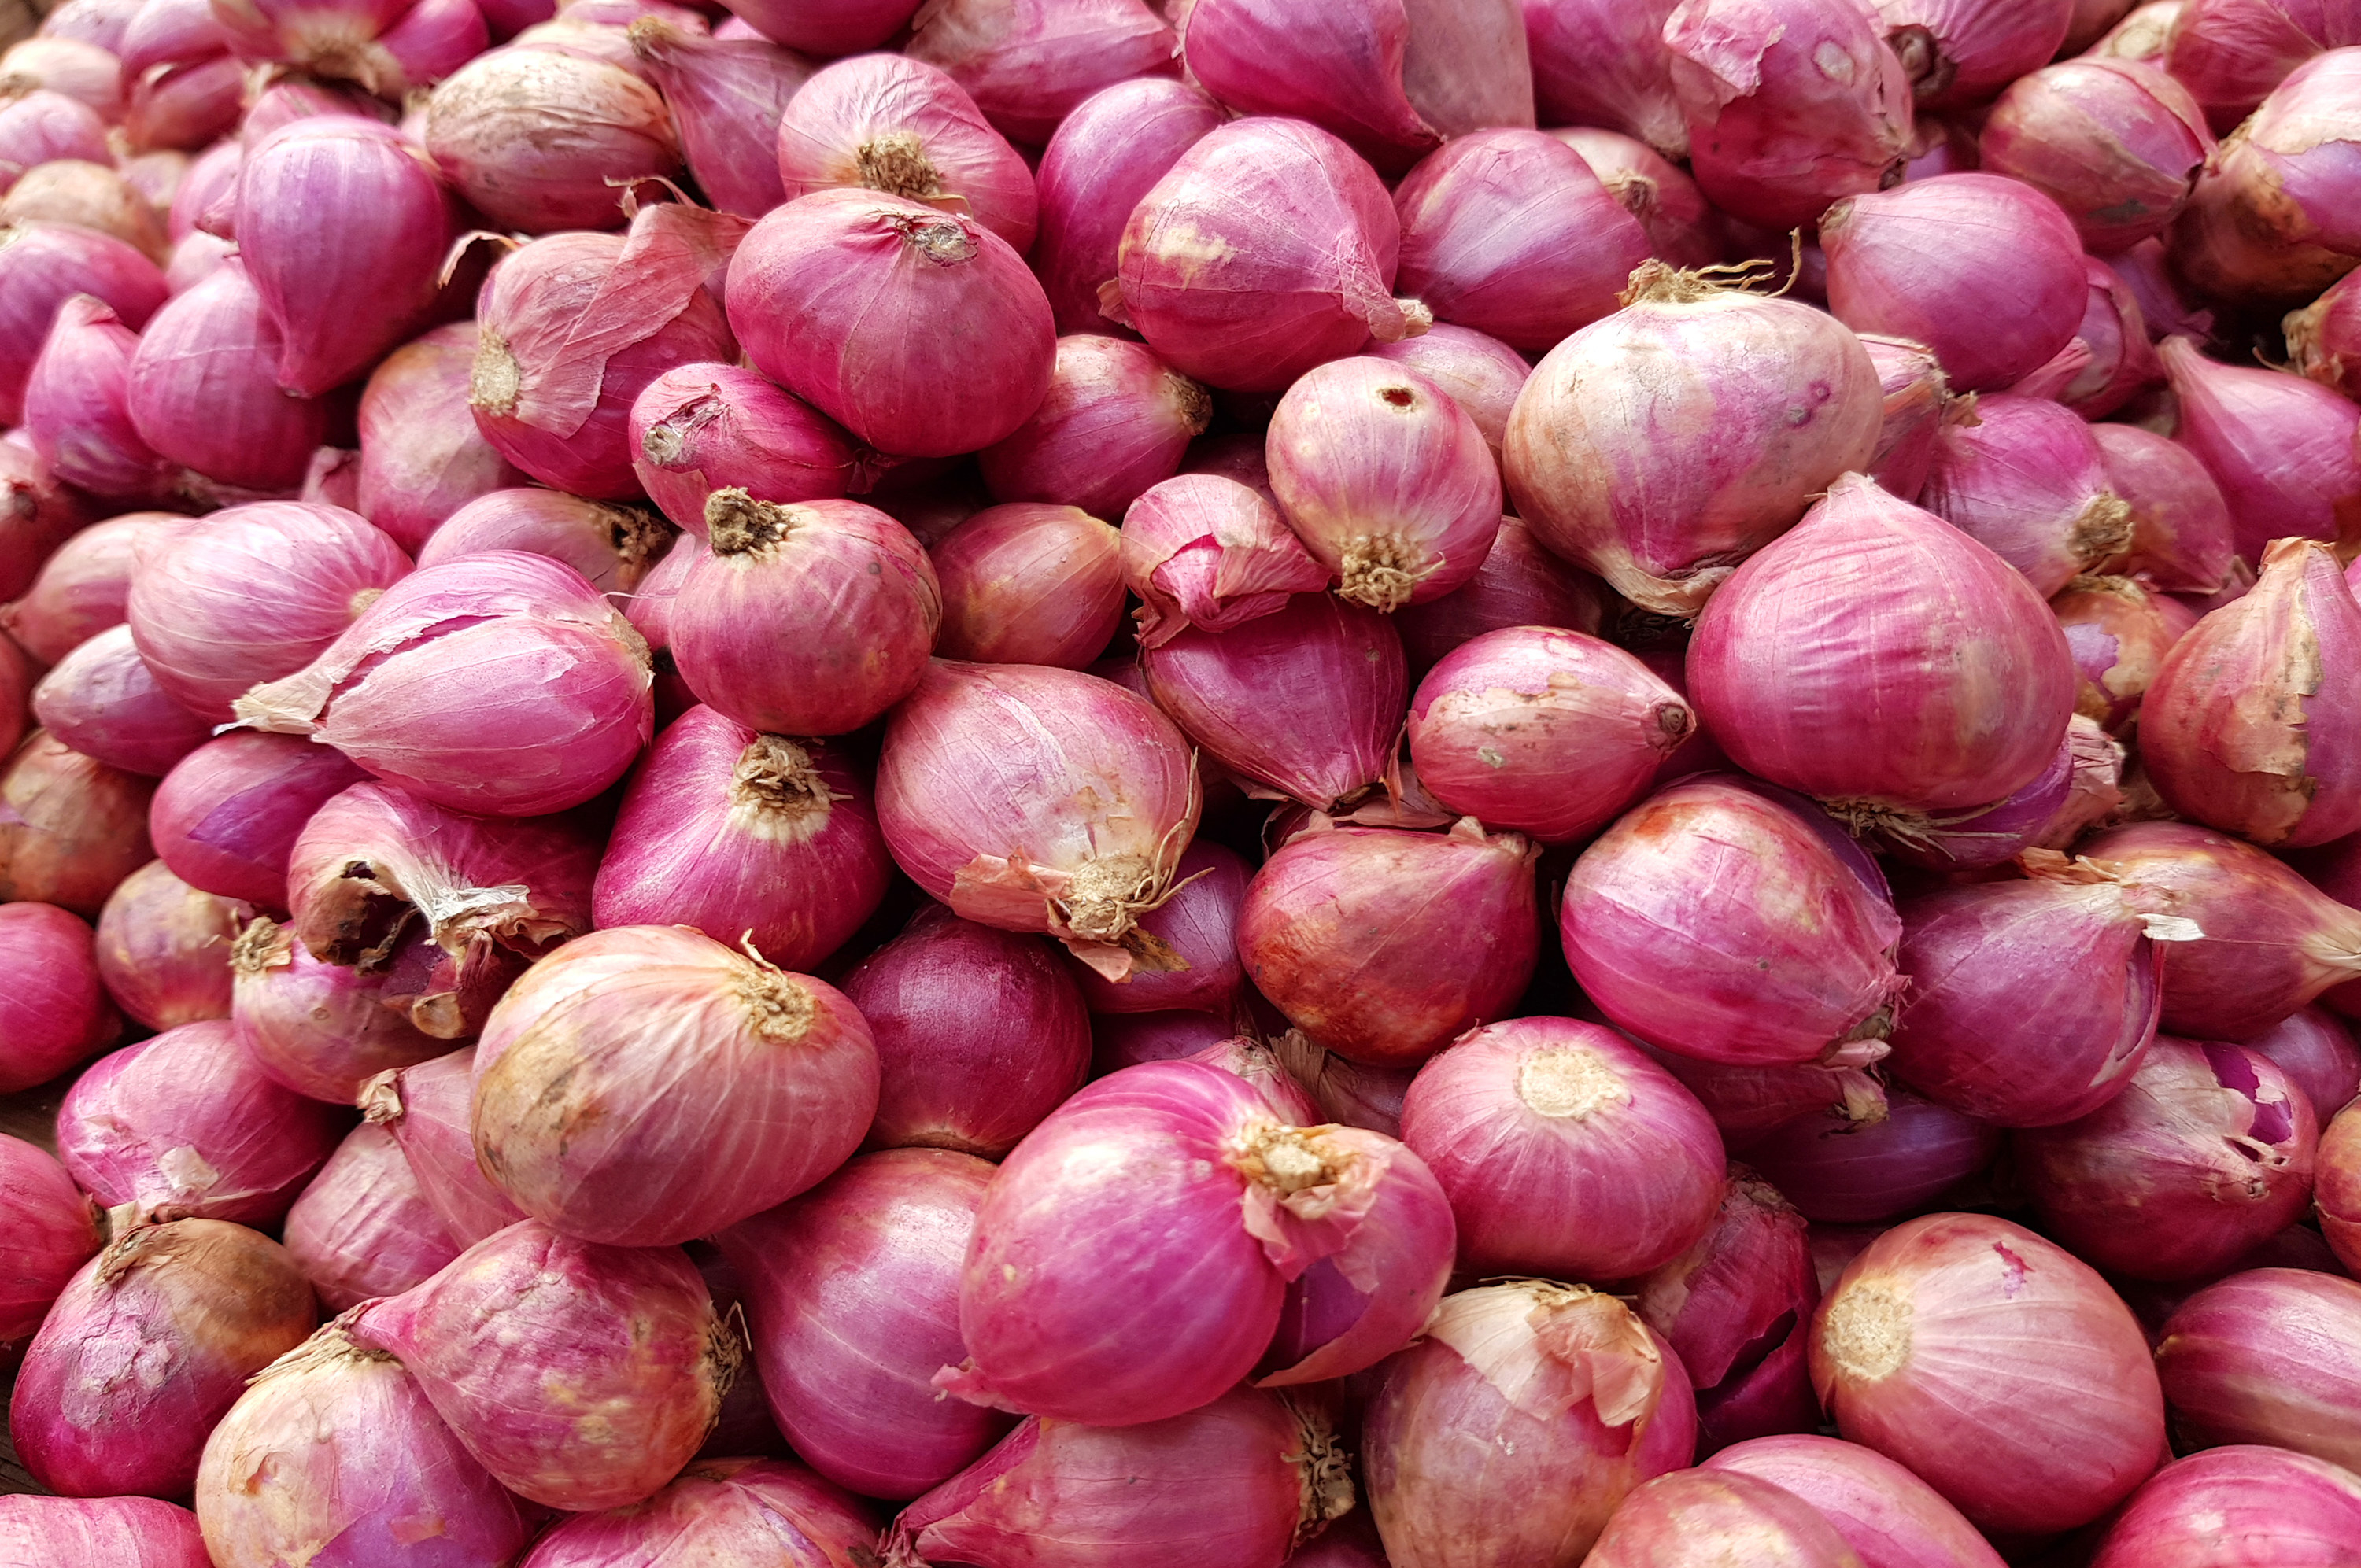 A pile of red onions